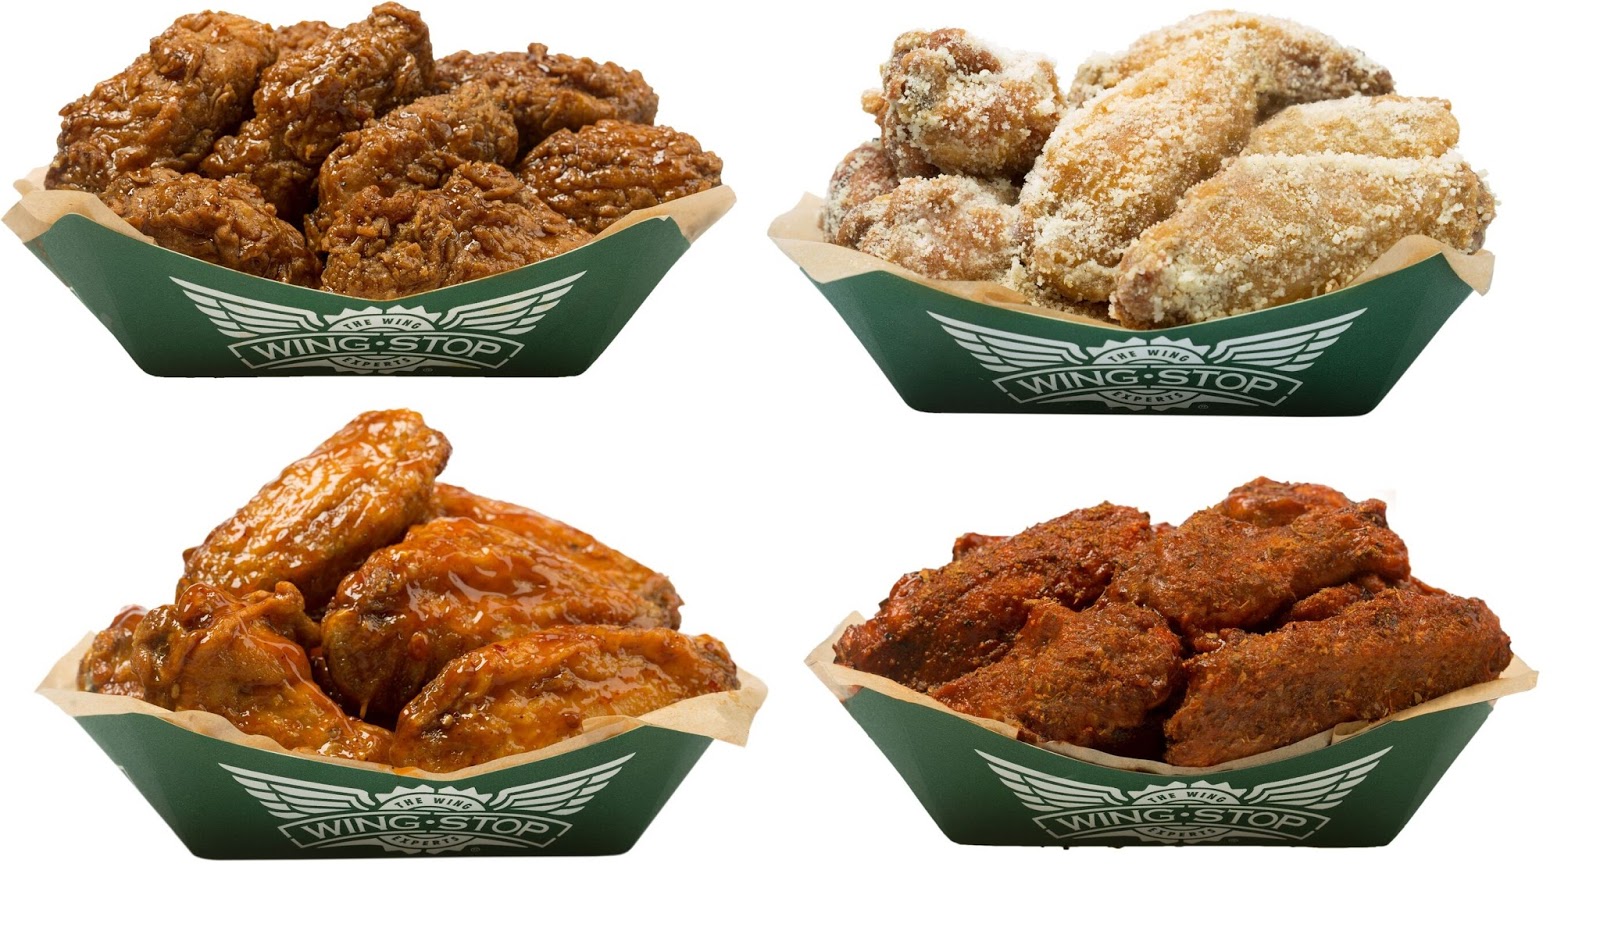 Wingstop Launches #CantStopTheCrave Menu for Cravings that Just Won't